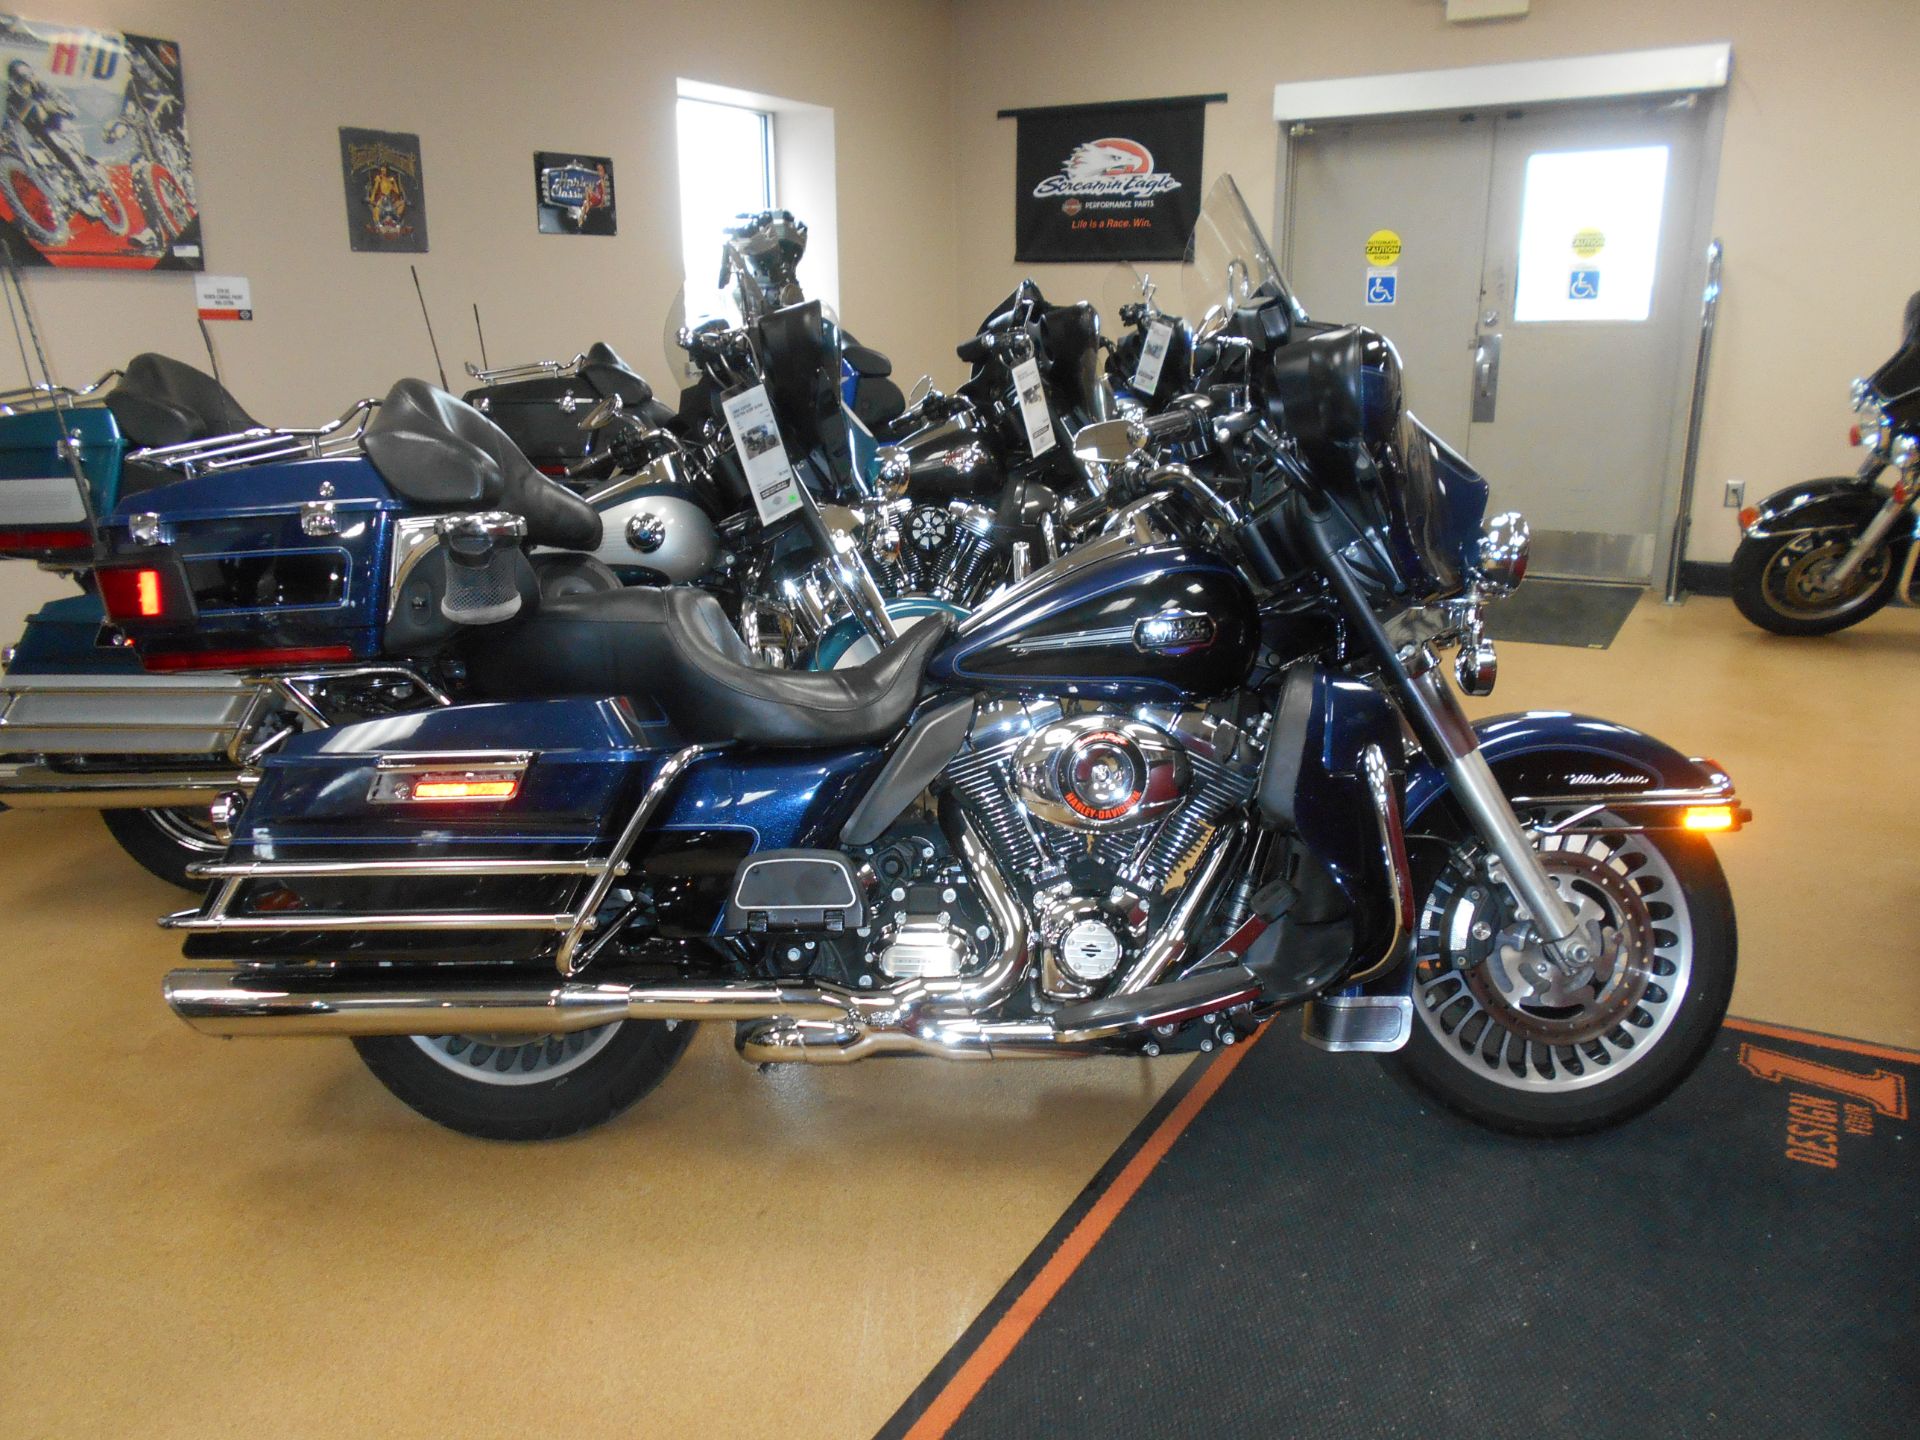 2013 Harley-Davidson Electra Glide® Ultra Limited in Mauston, Wisconsin - Photo 1